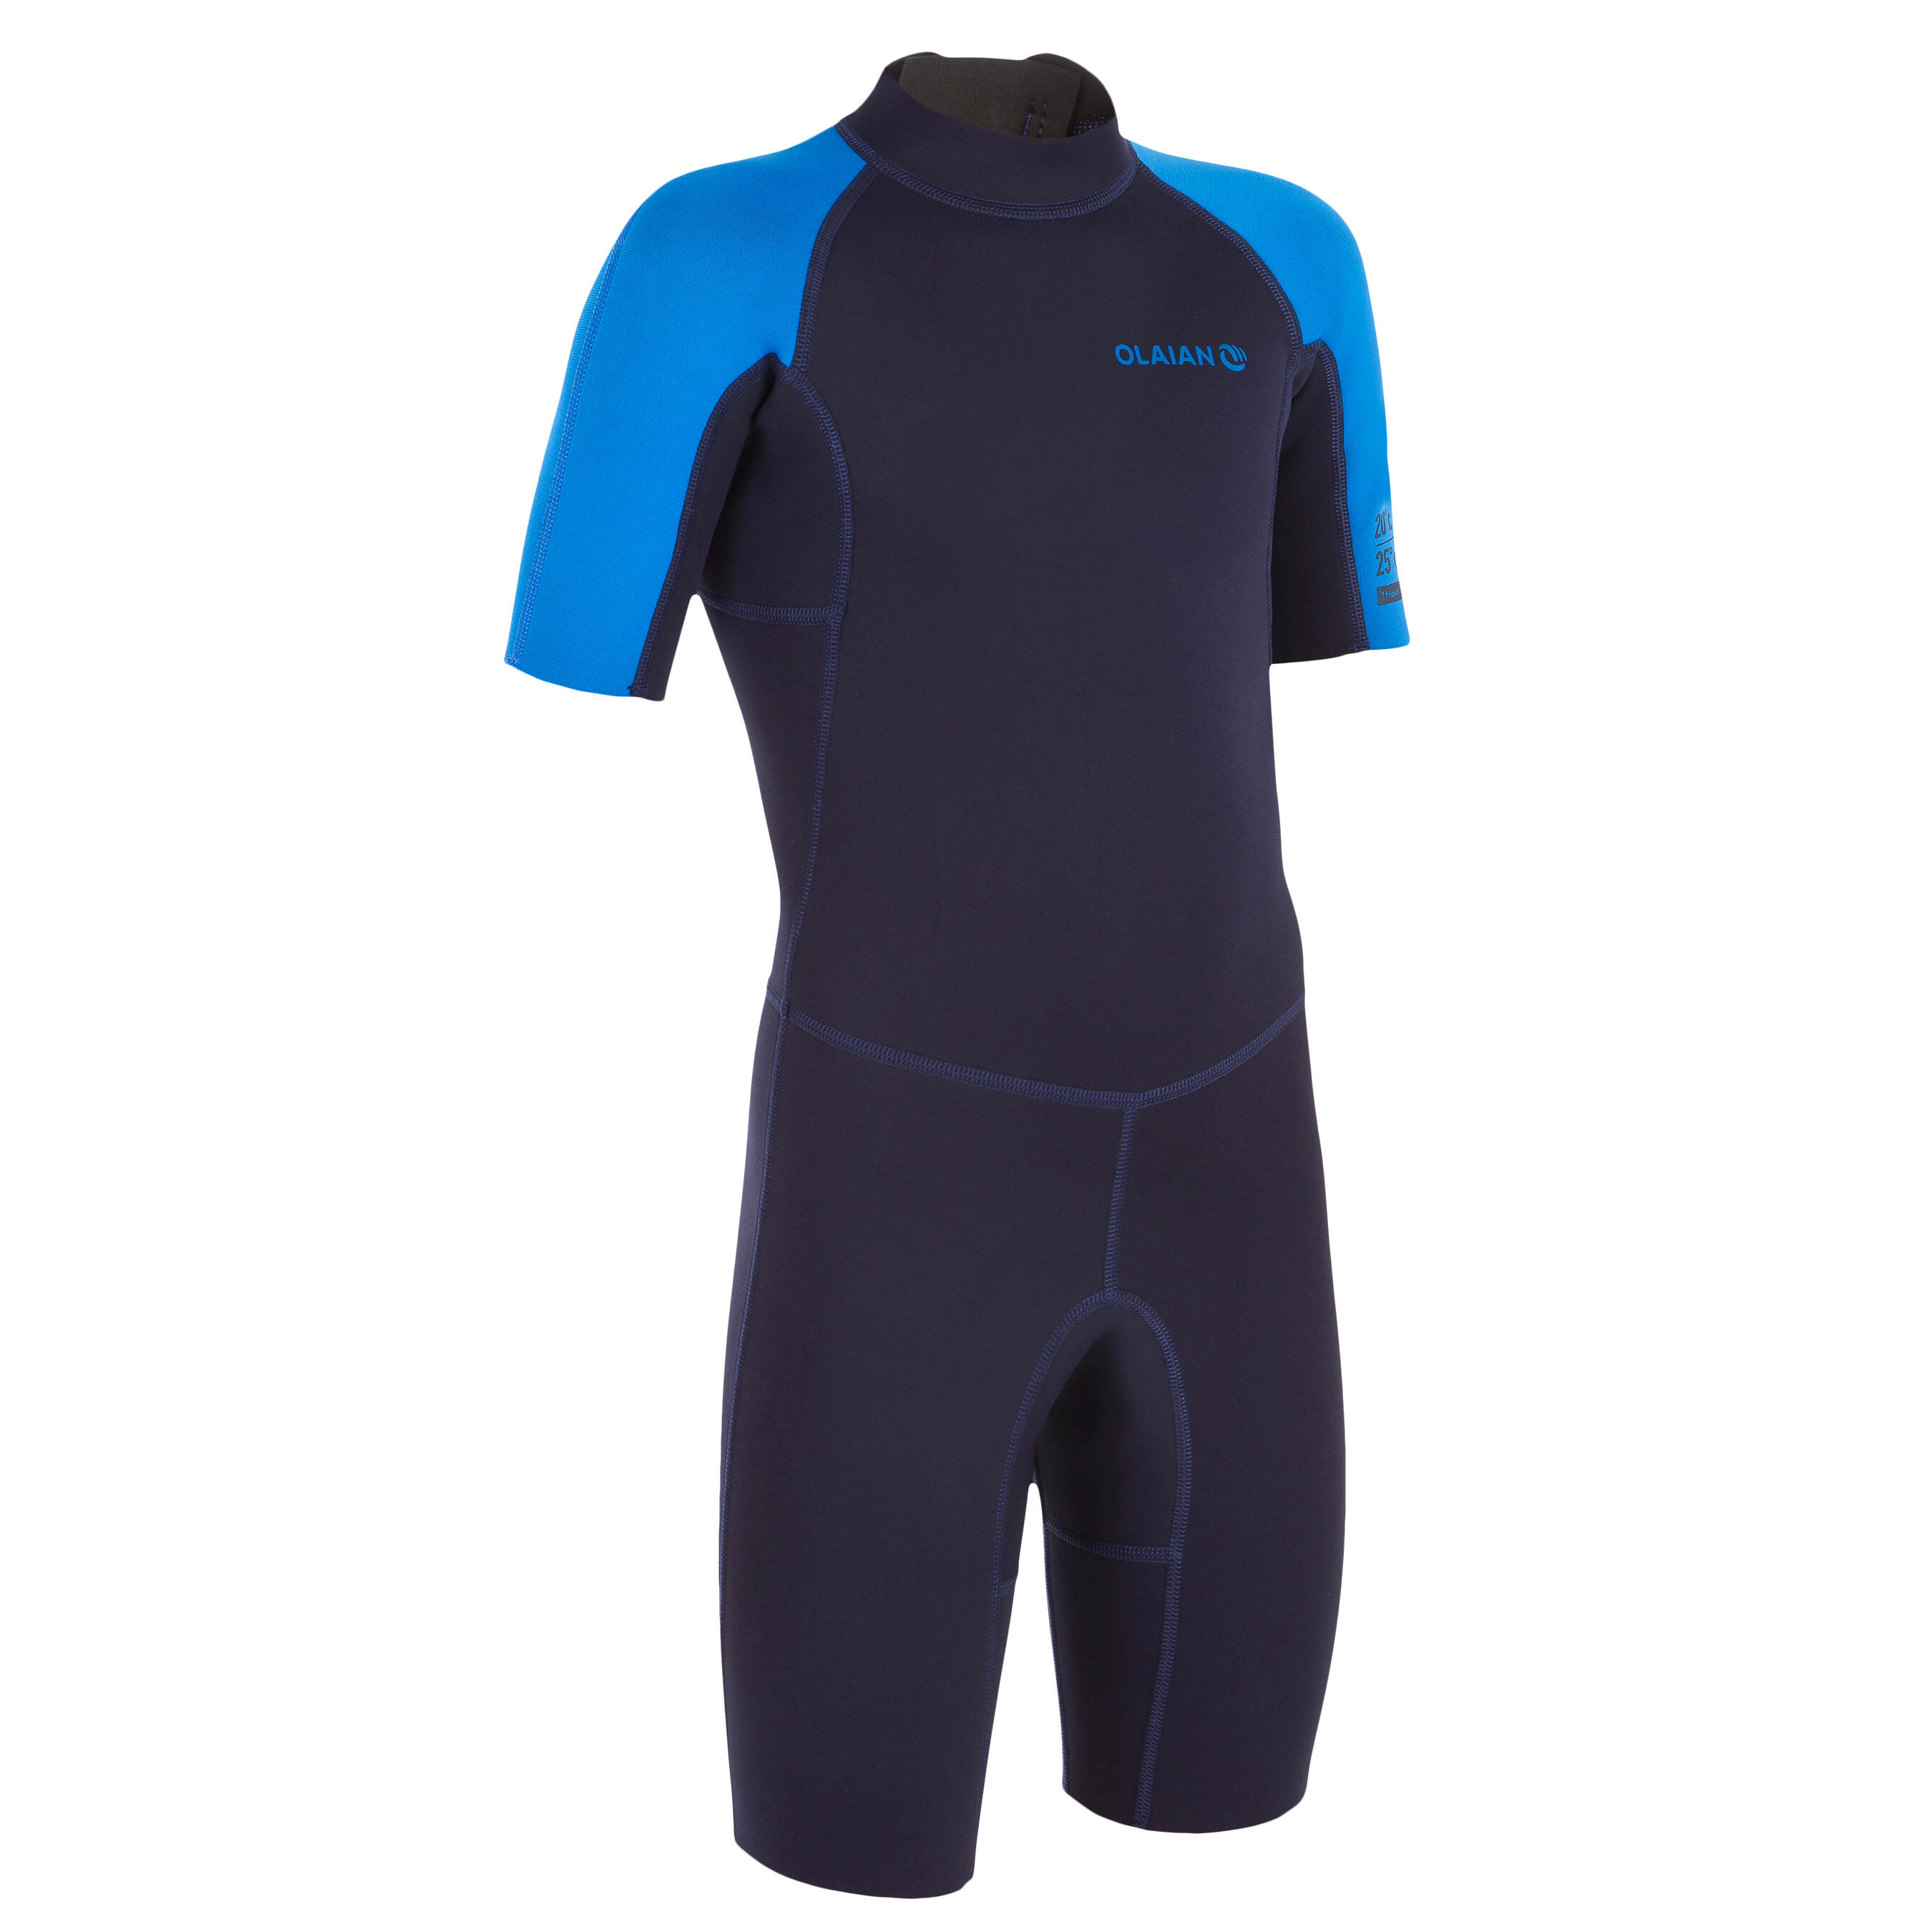 tribord shorty wetsuit